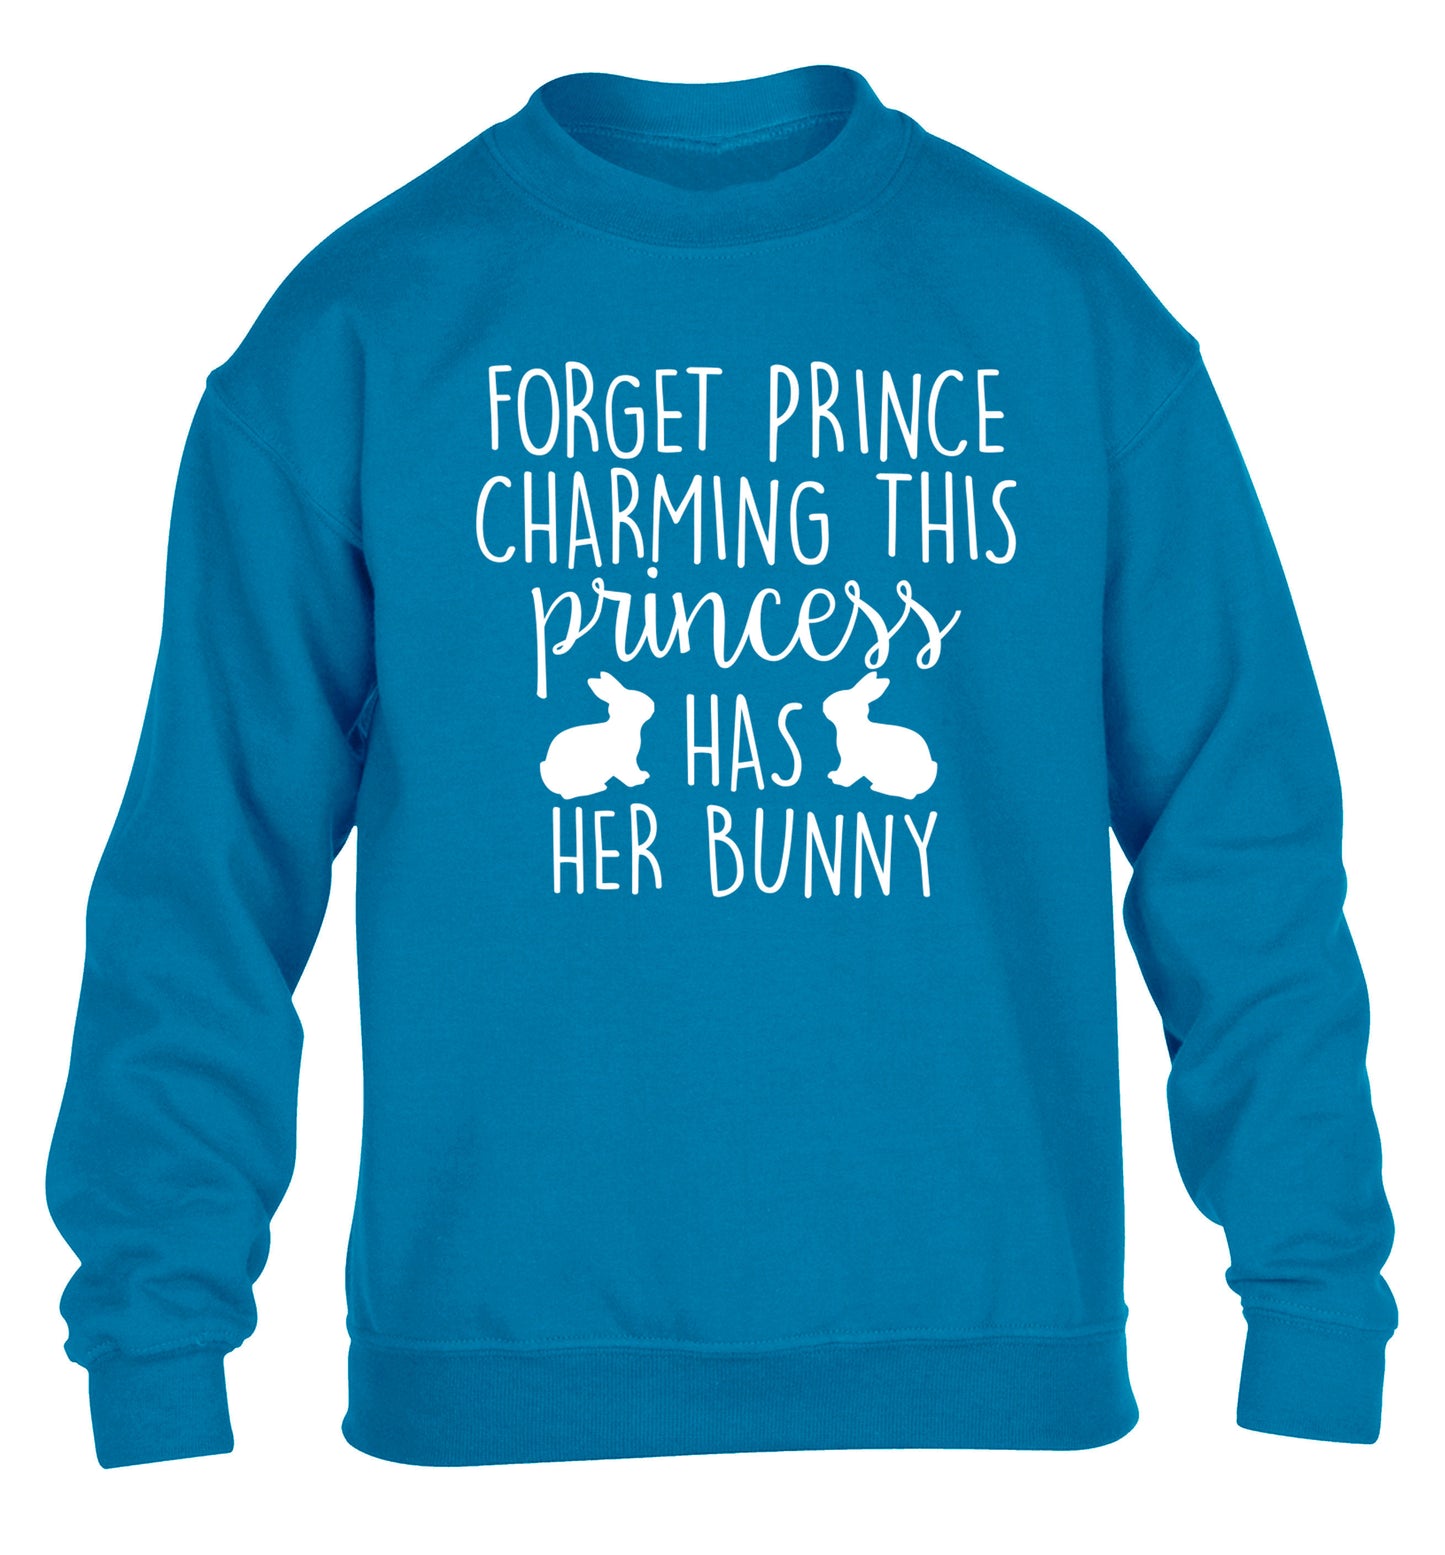 Forget prince charming this princess has her bunny children's blue  sweater 12-14 Years